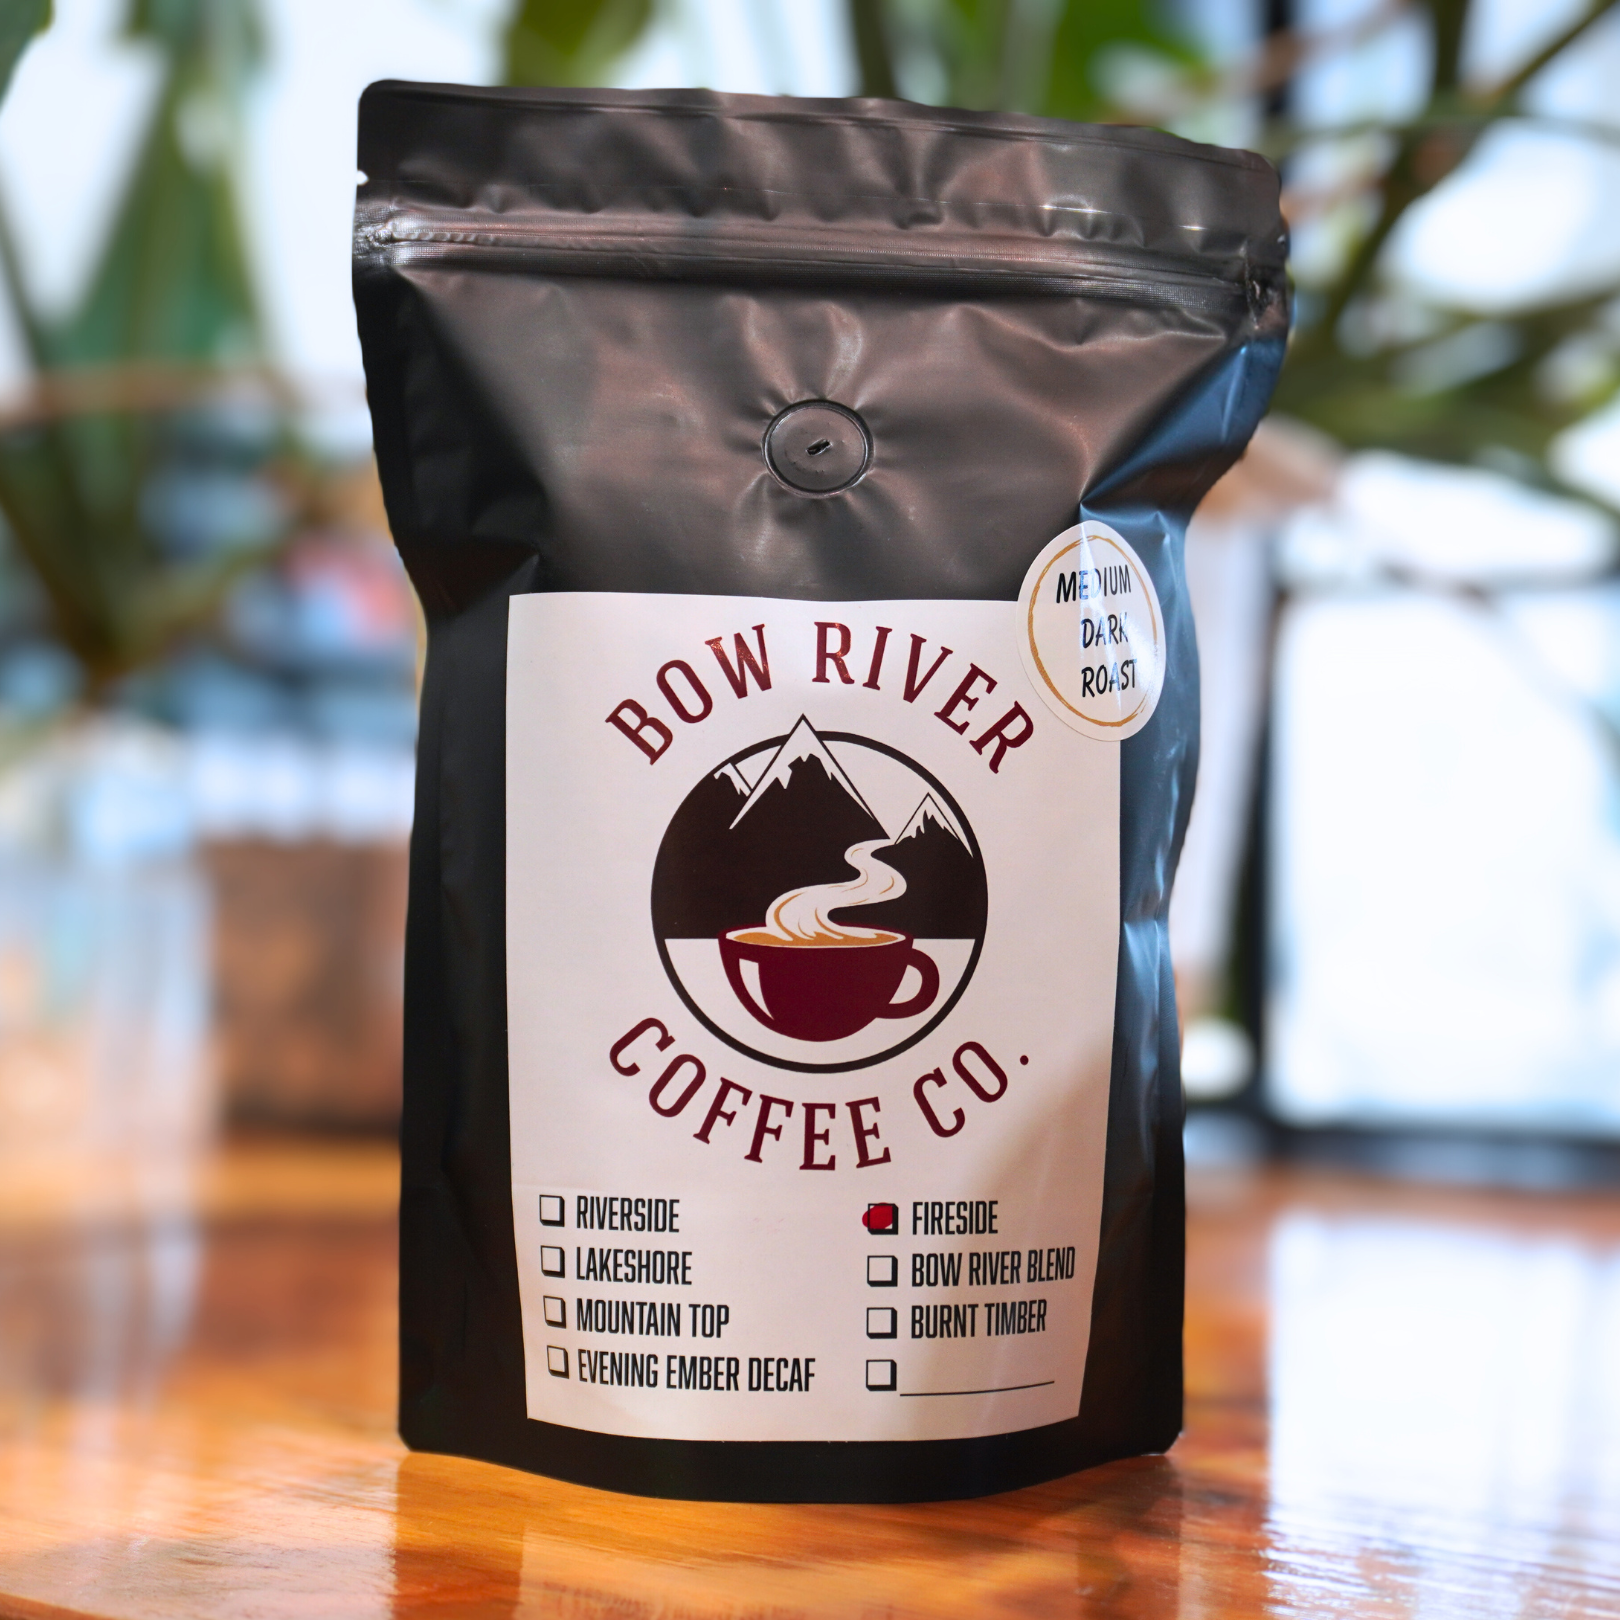 Bow River Coffee Co. Fireside Coffee Beans